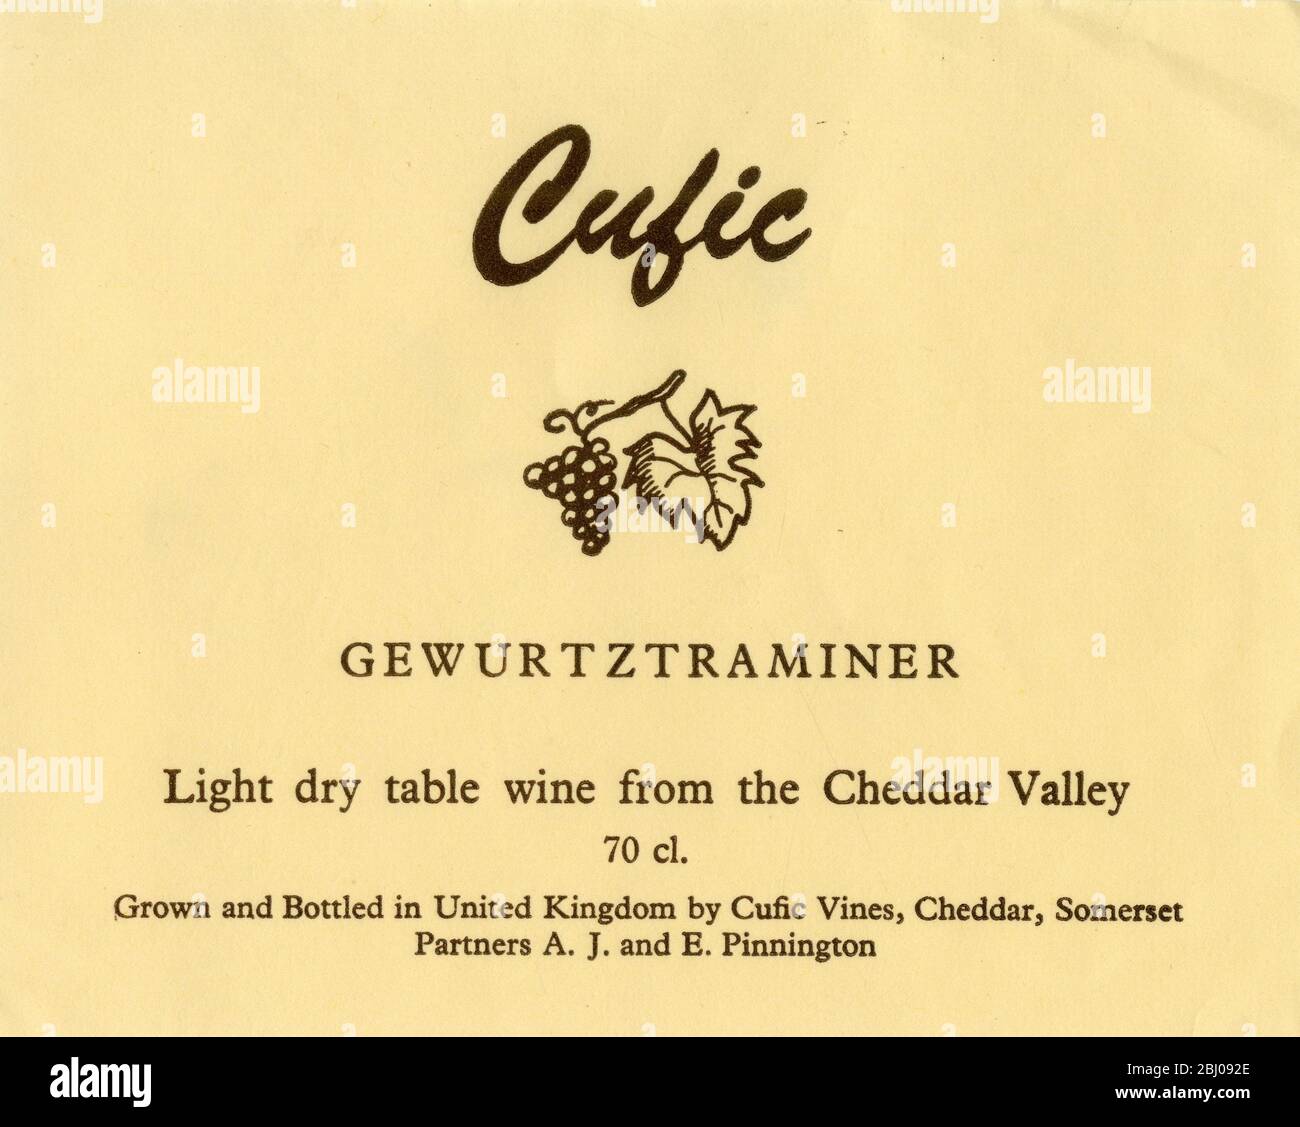 Wine Label. - Cufic. Light dry table wine from the Cheddar Valley. 70cl. Grown and bottled in the UK by Cufic vines, Cheddar Somerset Partners A.J. and E.Pinnington. - Stock Photo